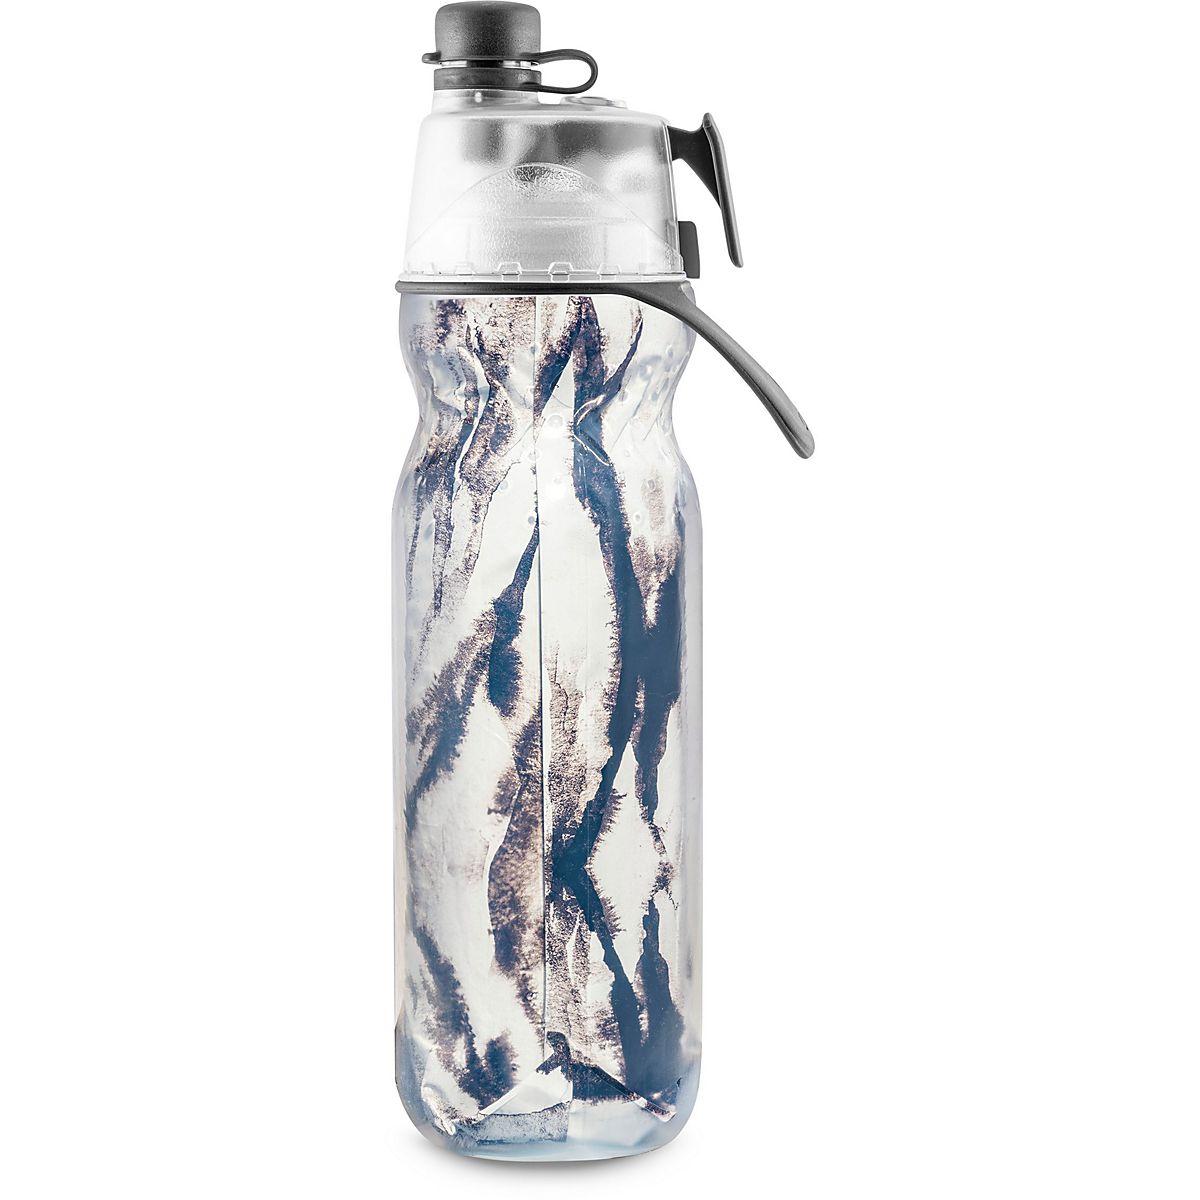 22 oz. MISTING DRINK BOTTLE ‹ Products ‹ Arctic Cove